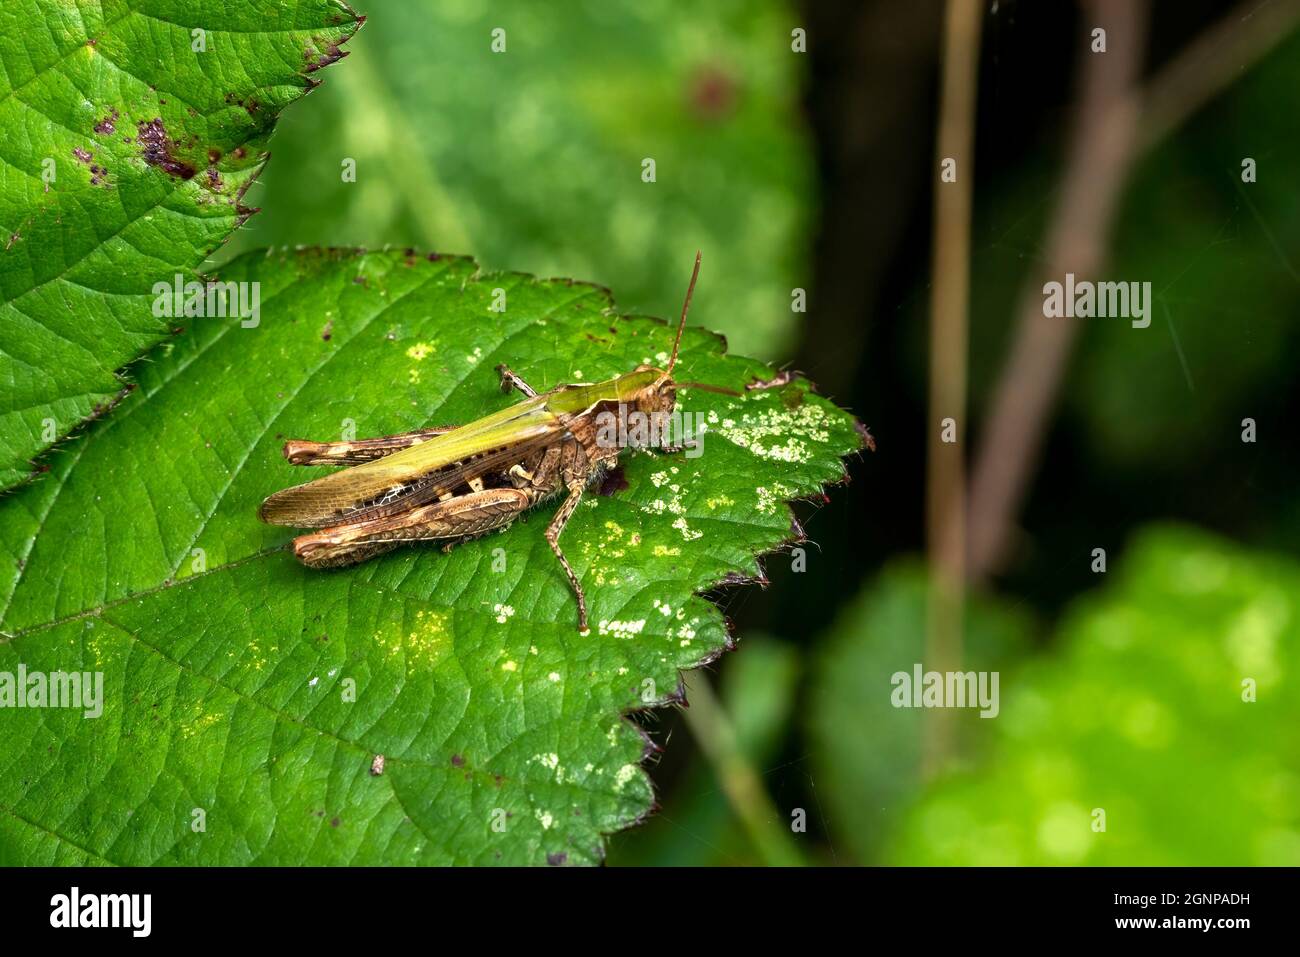 Common field grasshopper (Chorthippus brunneus) a common green brown insect species found in fields meadows hedges and gardens, stock photo image Stock Photo